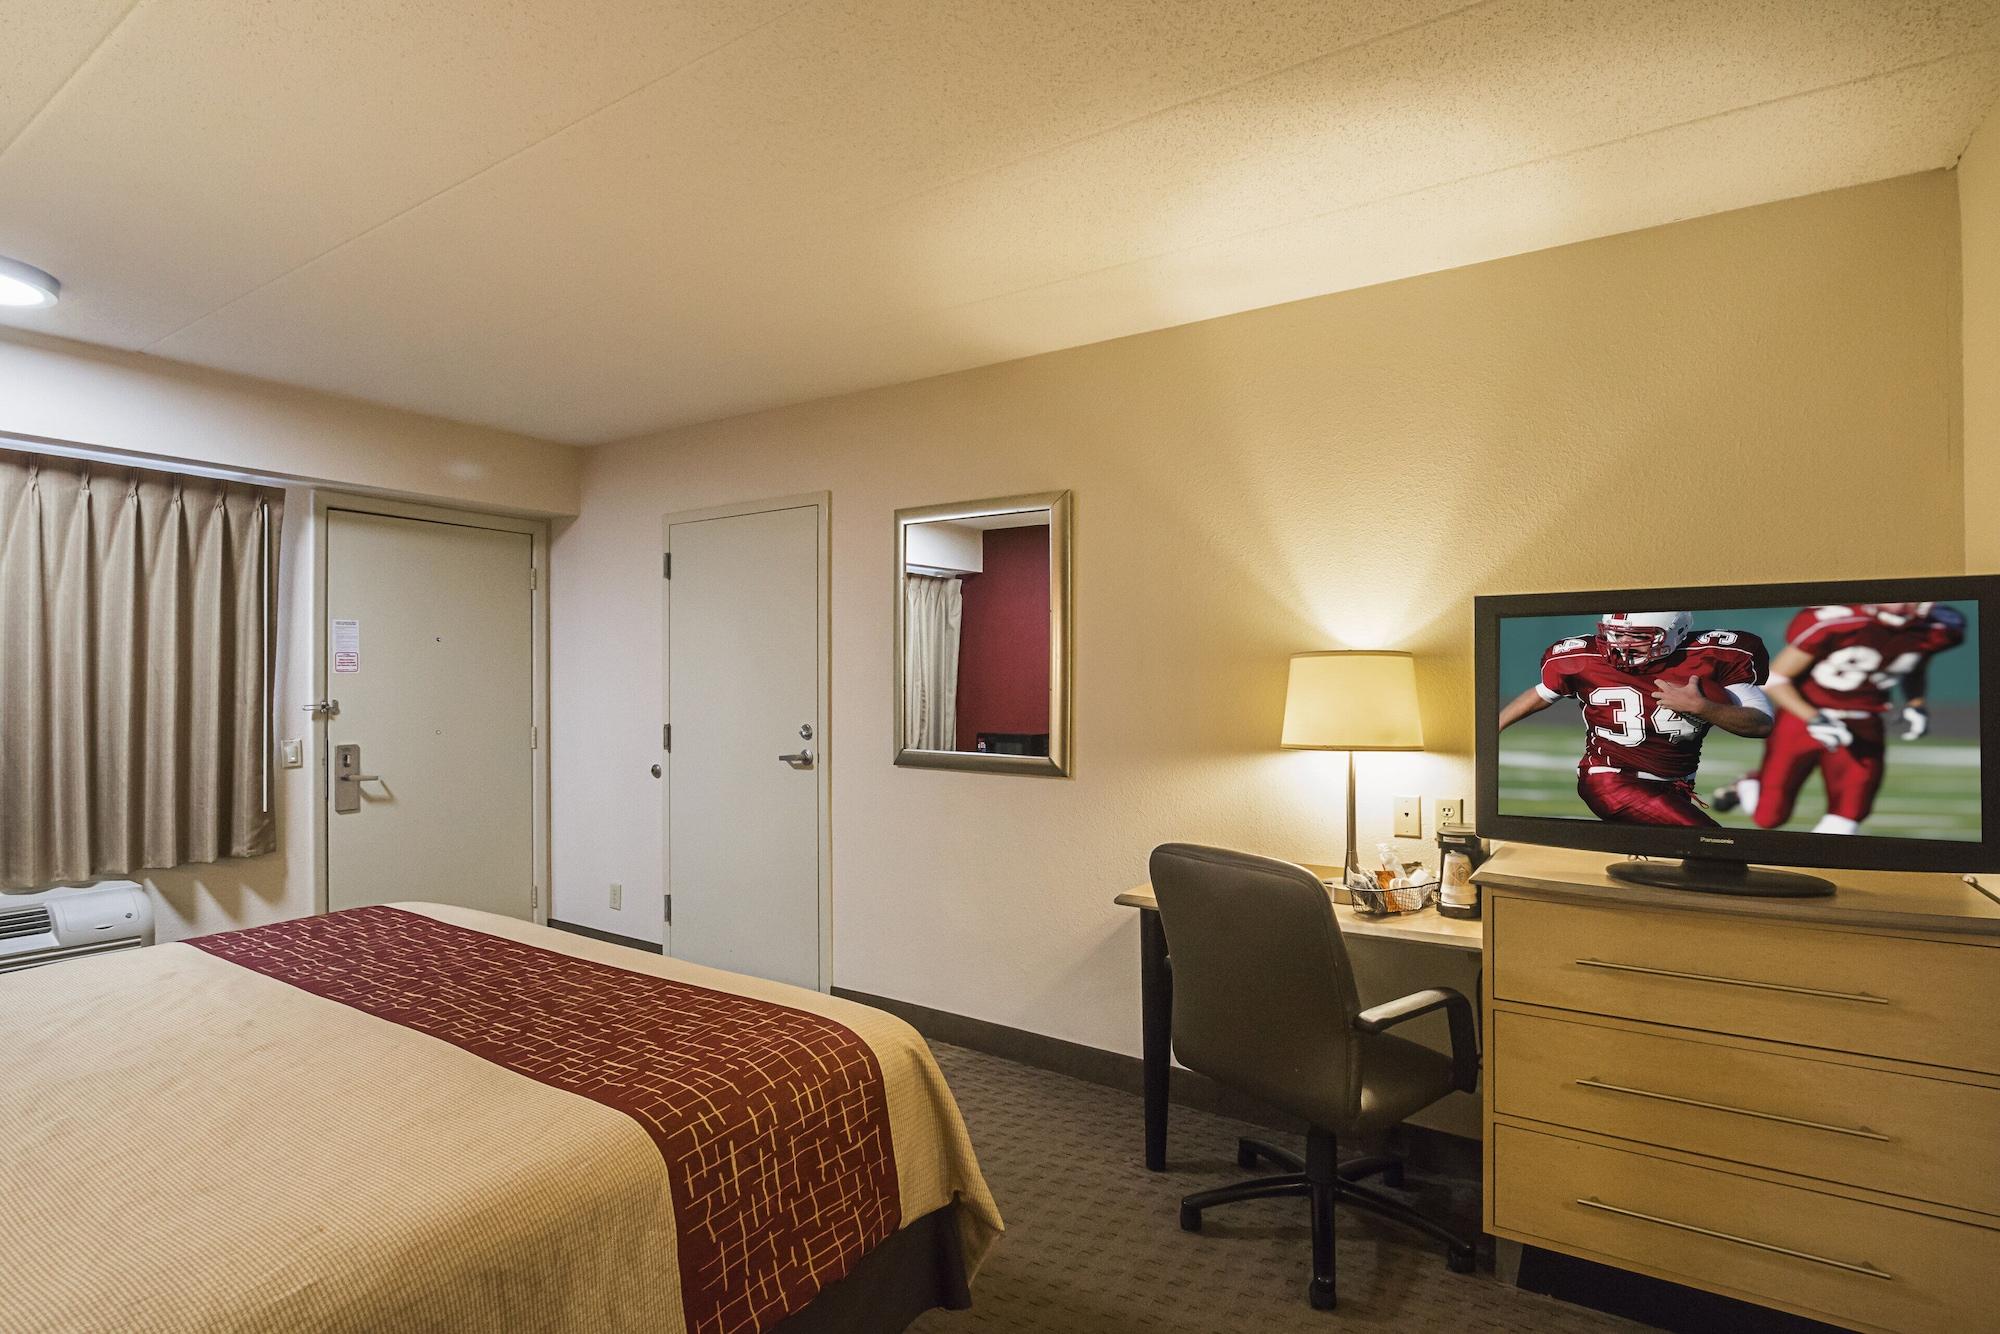 Red Roof Inn Indianapolis North - College Park Экстерьер фото